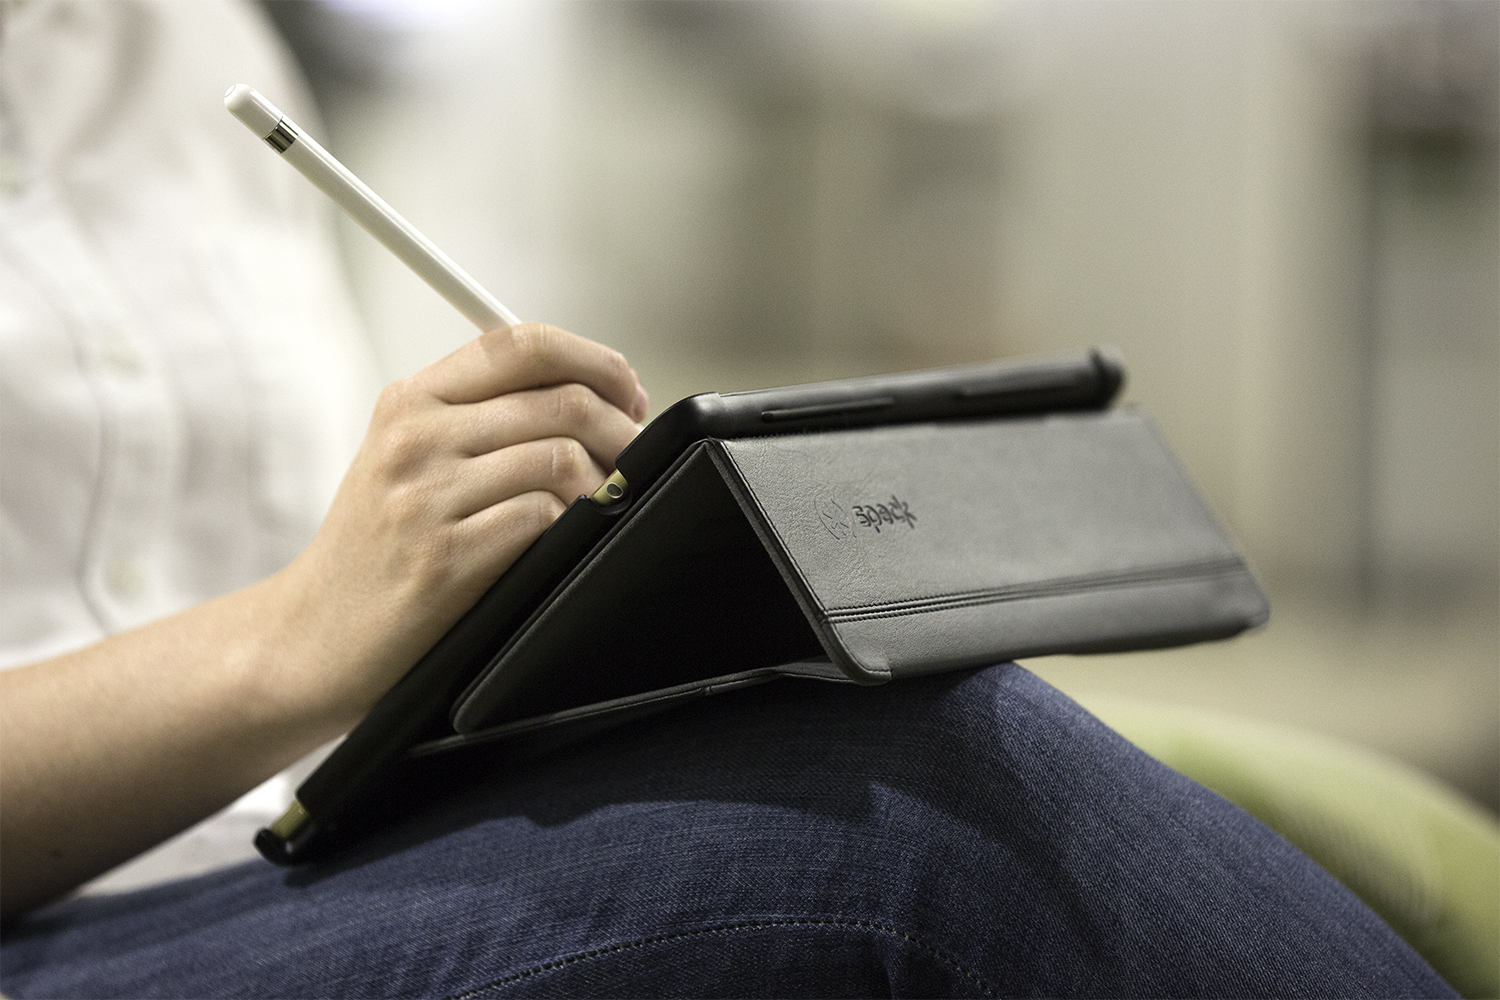 Our StyleFolio iPad Pro Pencil Case is Available Now